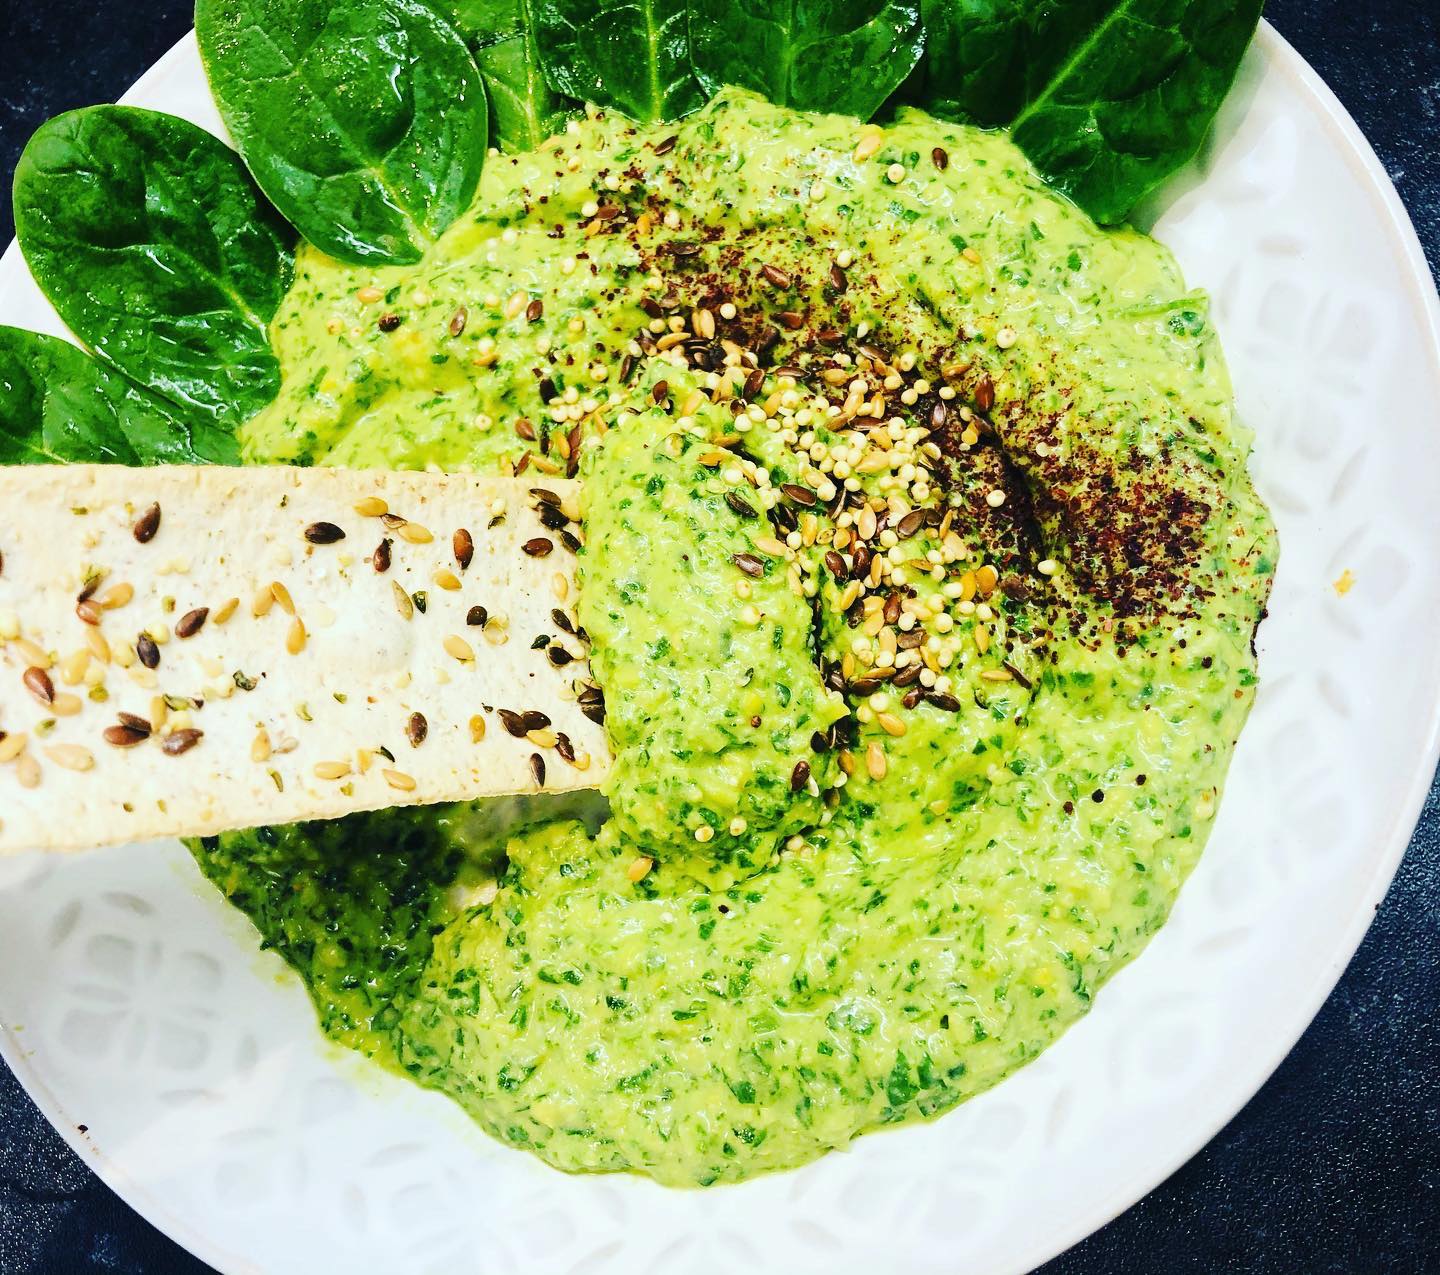 5-Minute Oil-Free Spinach & Parsley Hummus